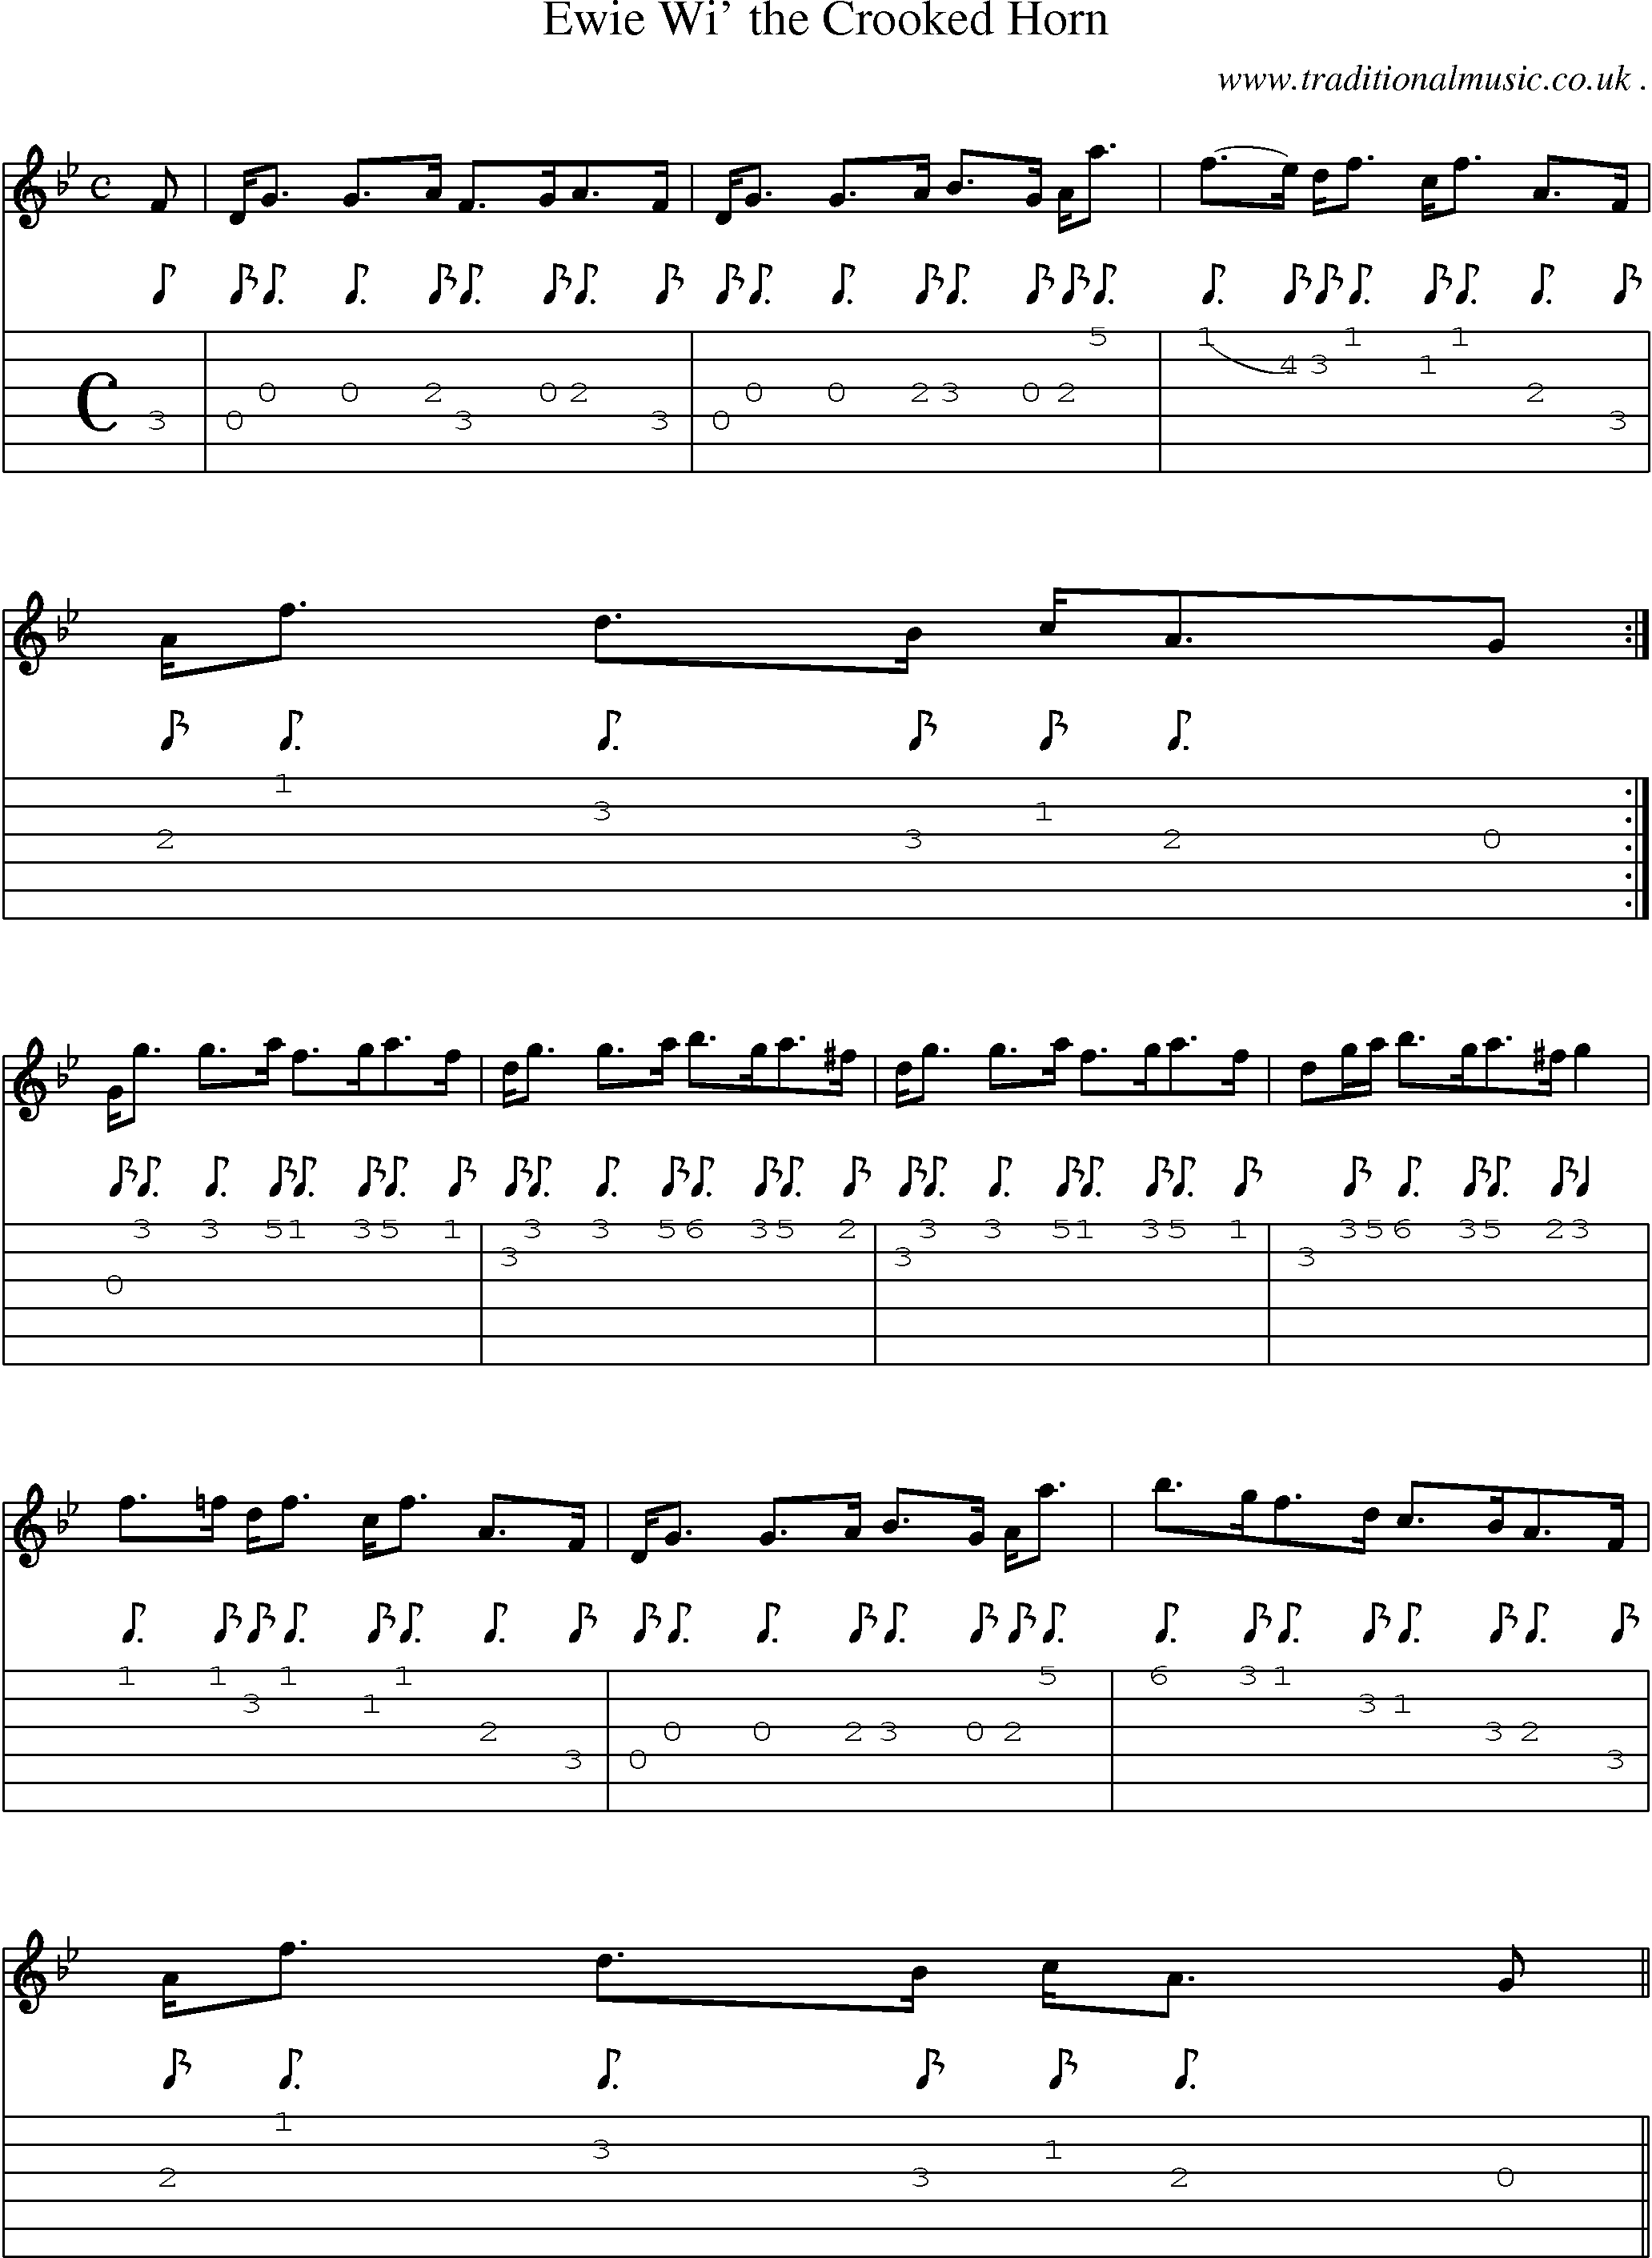 Sheet-music  score, Chords and Guitar Tabs for Ewie Wi The Crooked Horn